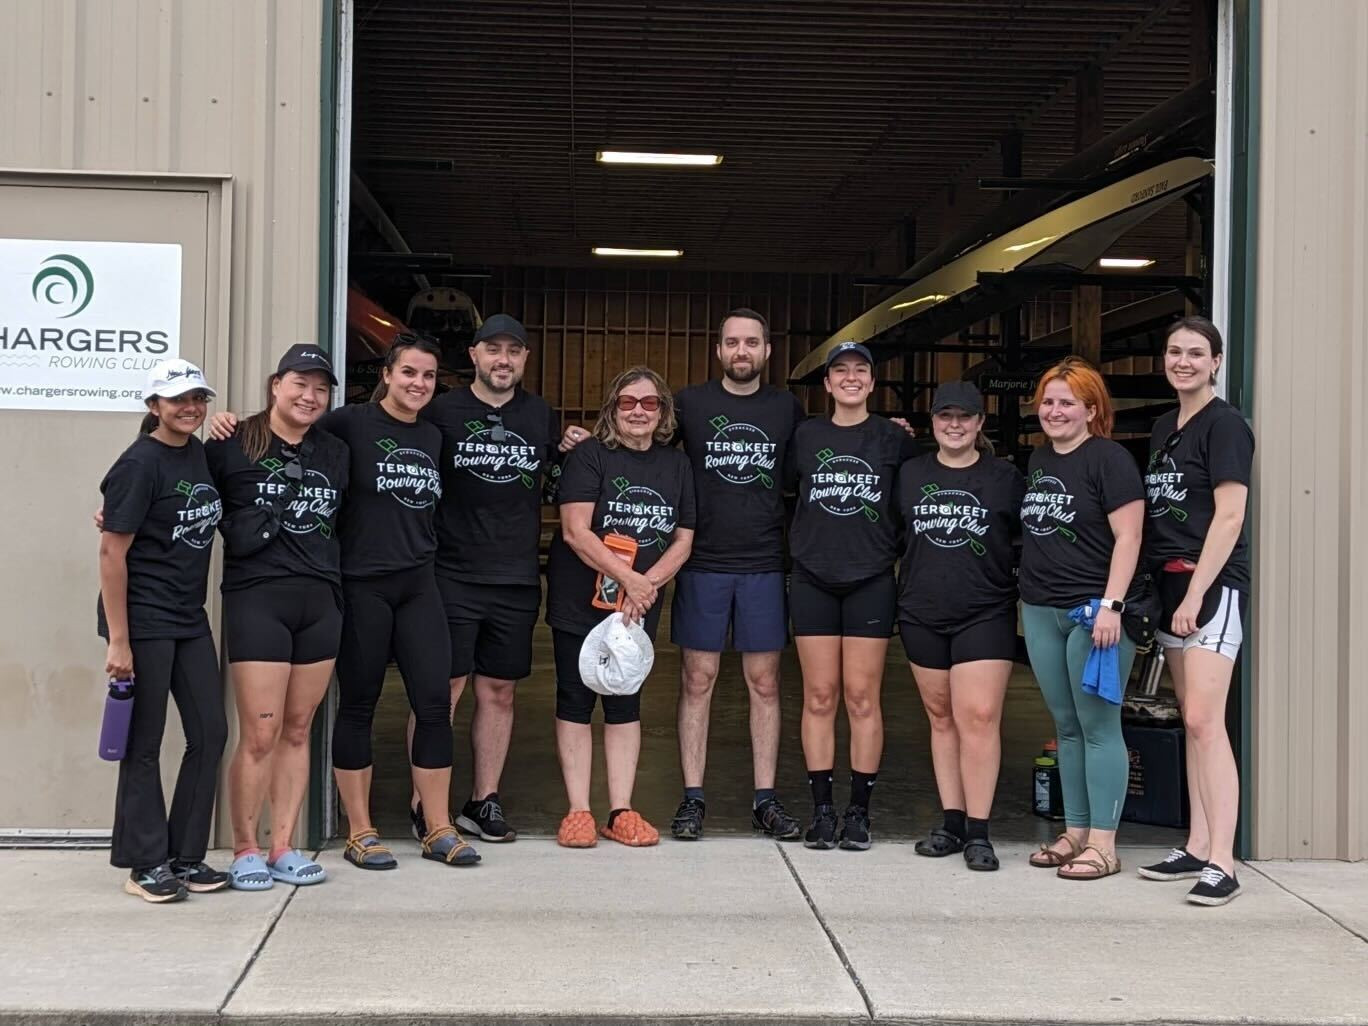 Employees meet up for extracurriculars together– check out the Terakeet Rowing Club!